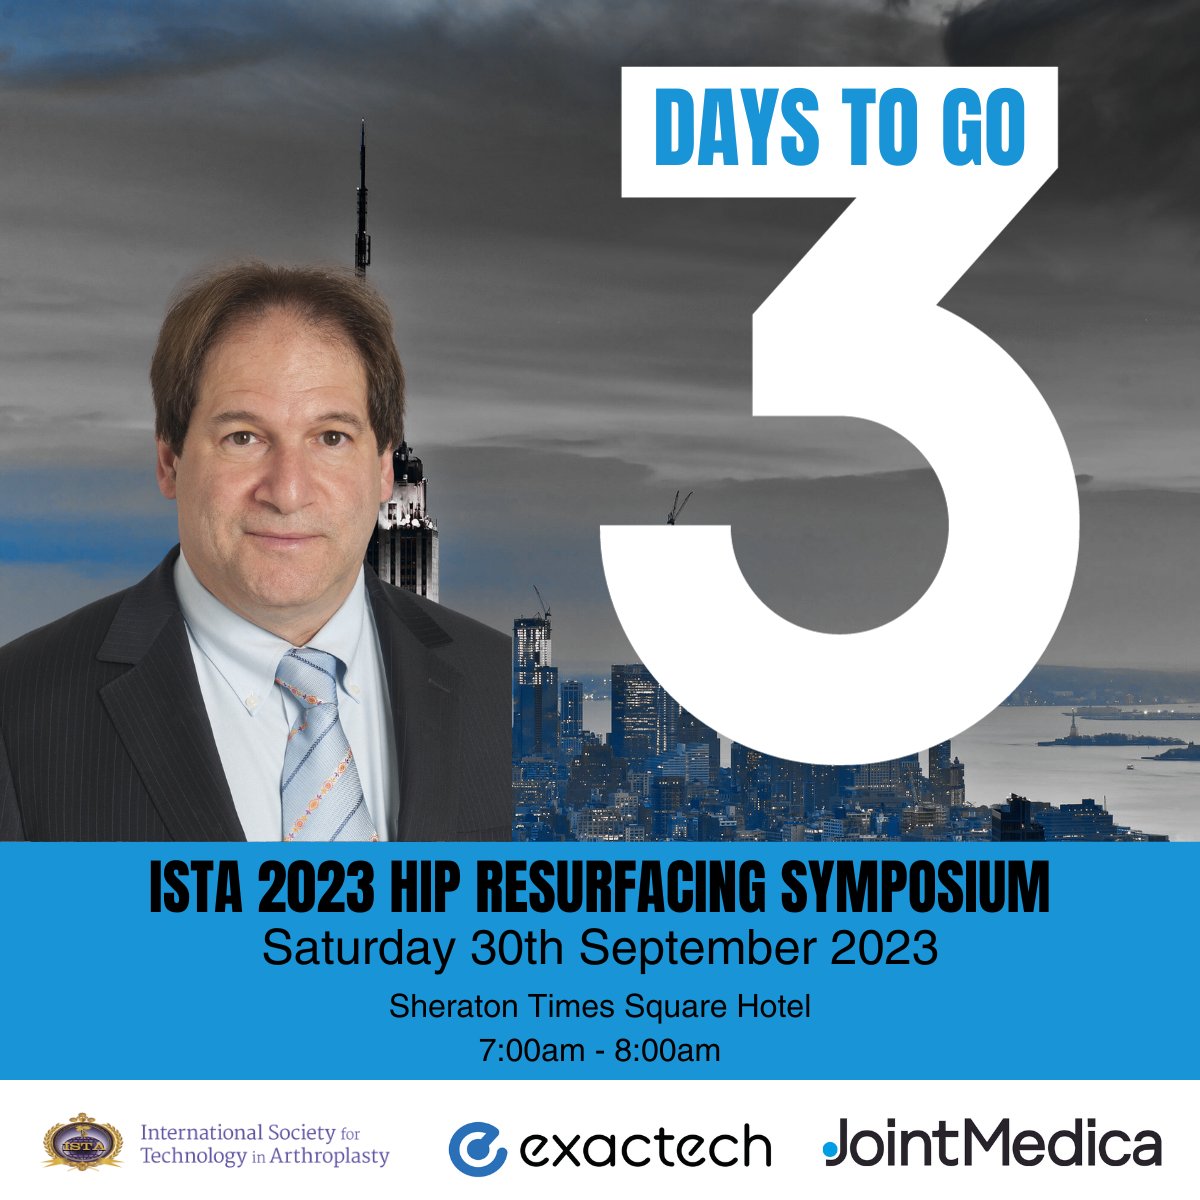 The 34th annual ISTA congress has officially started! Which means we are now just three days away from this years #ISTA2023 #HipResurfacing Symposium. Join Dr. Michael Mont and find out why hip resurfacing is set to make a comeback!

Take a look at the full details here...